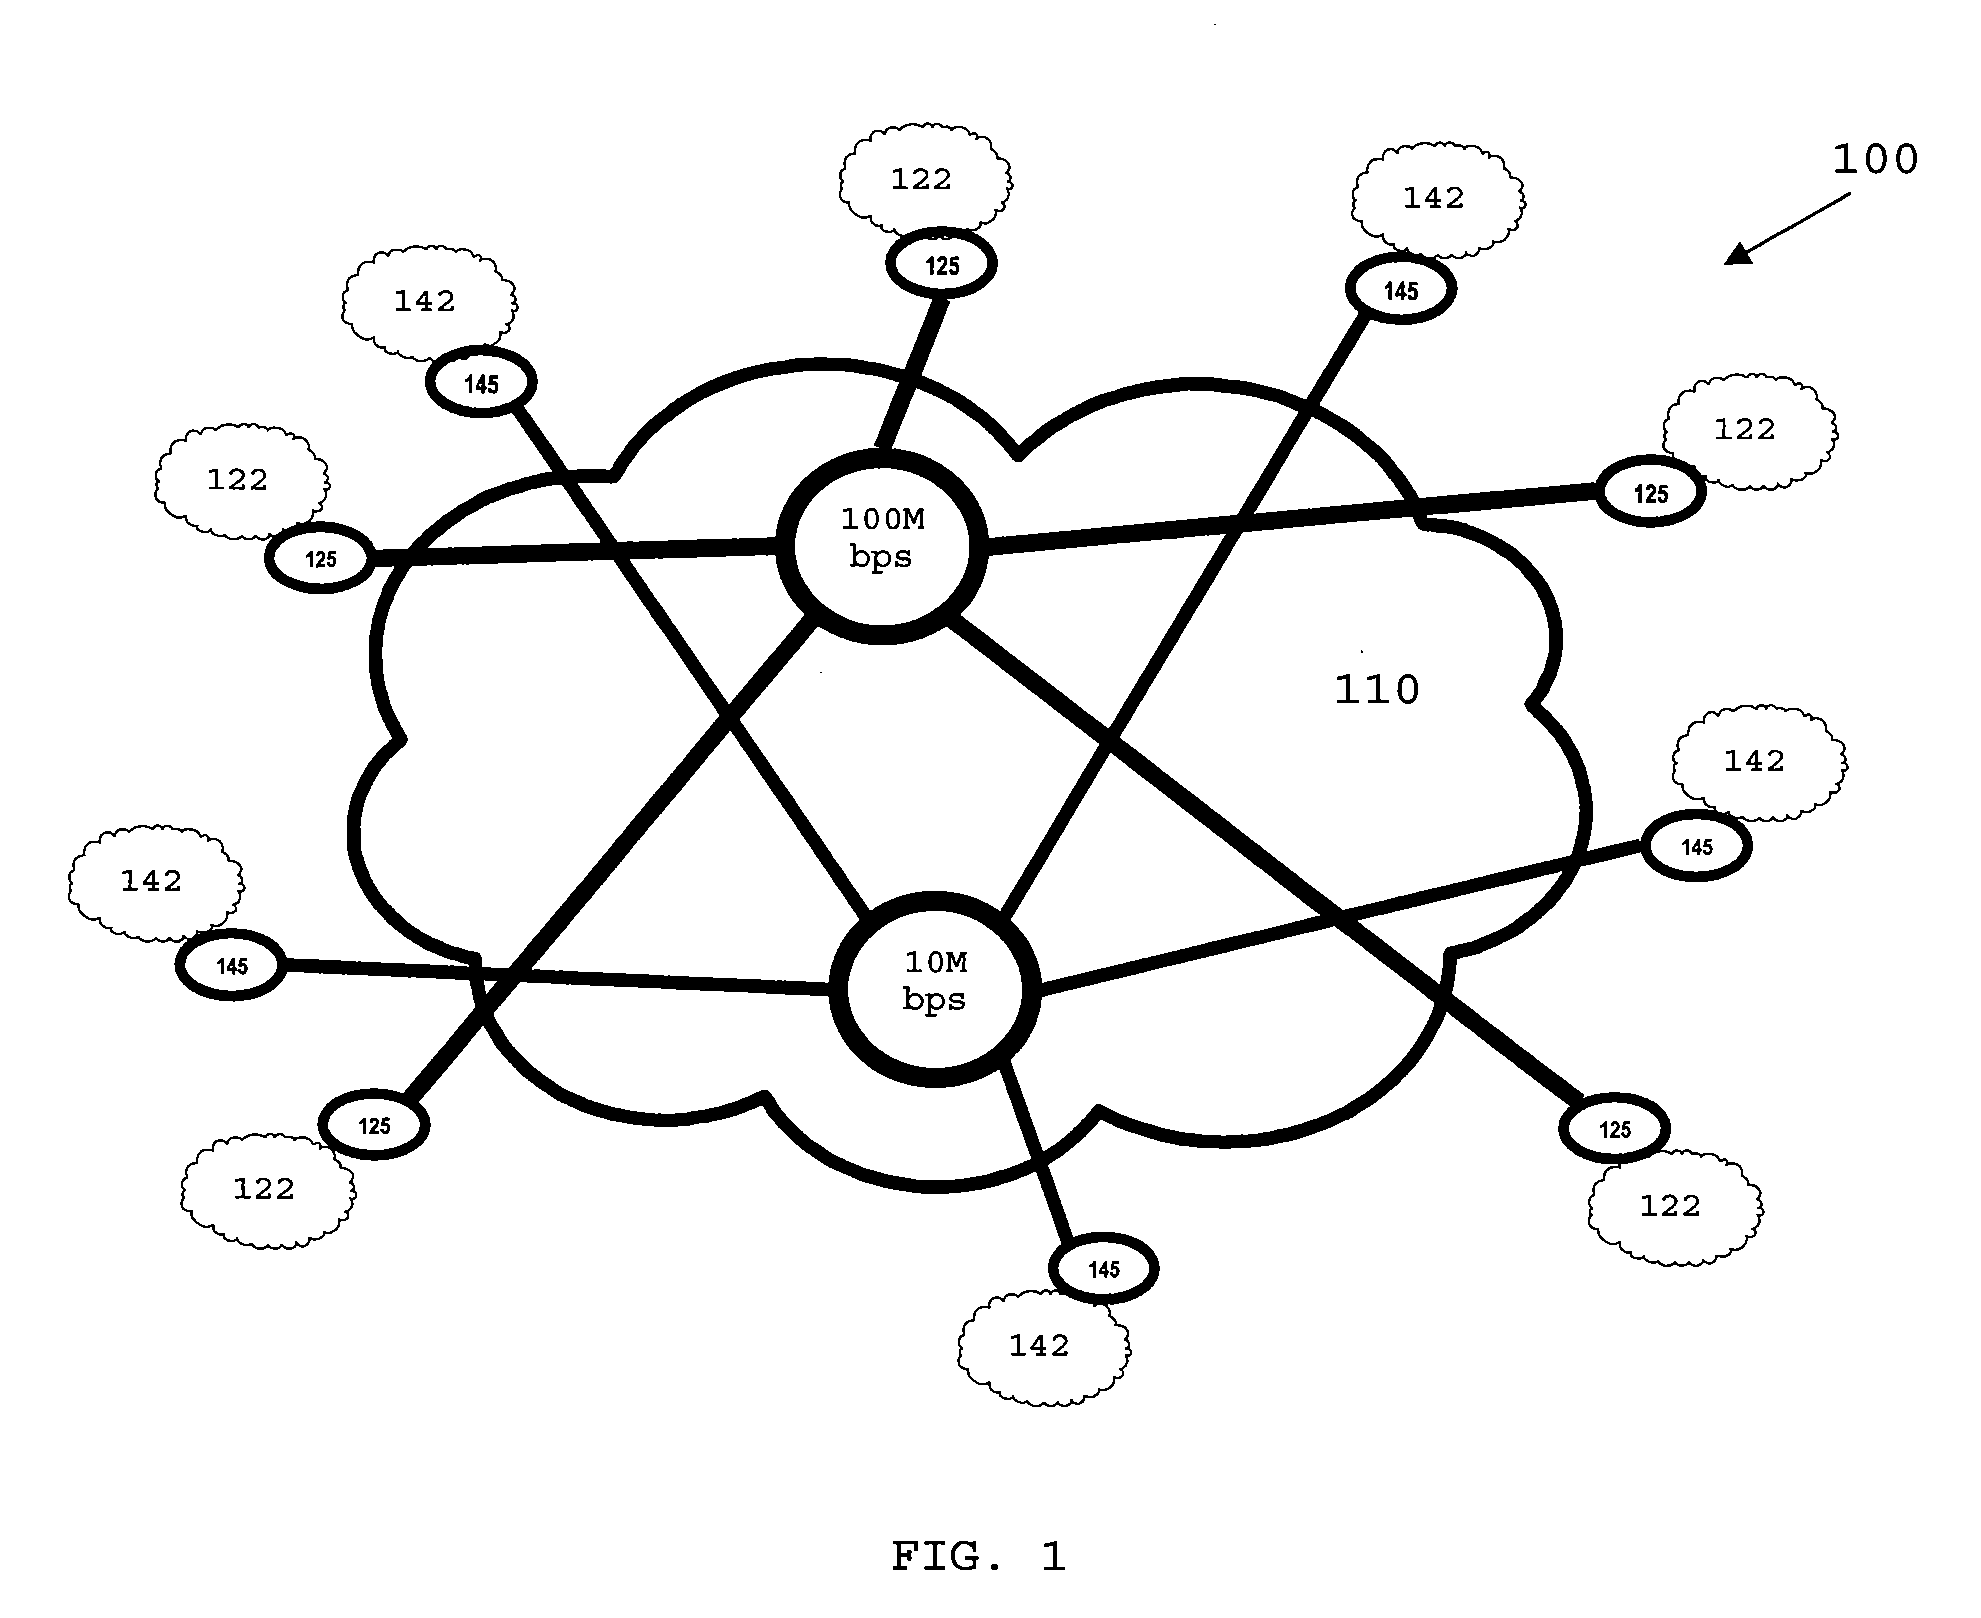 System for providing aggregate-rate communication services